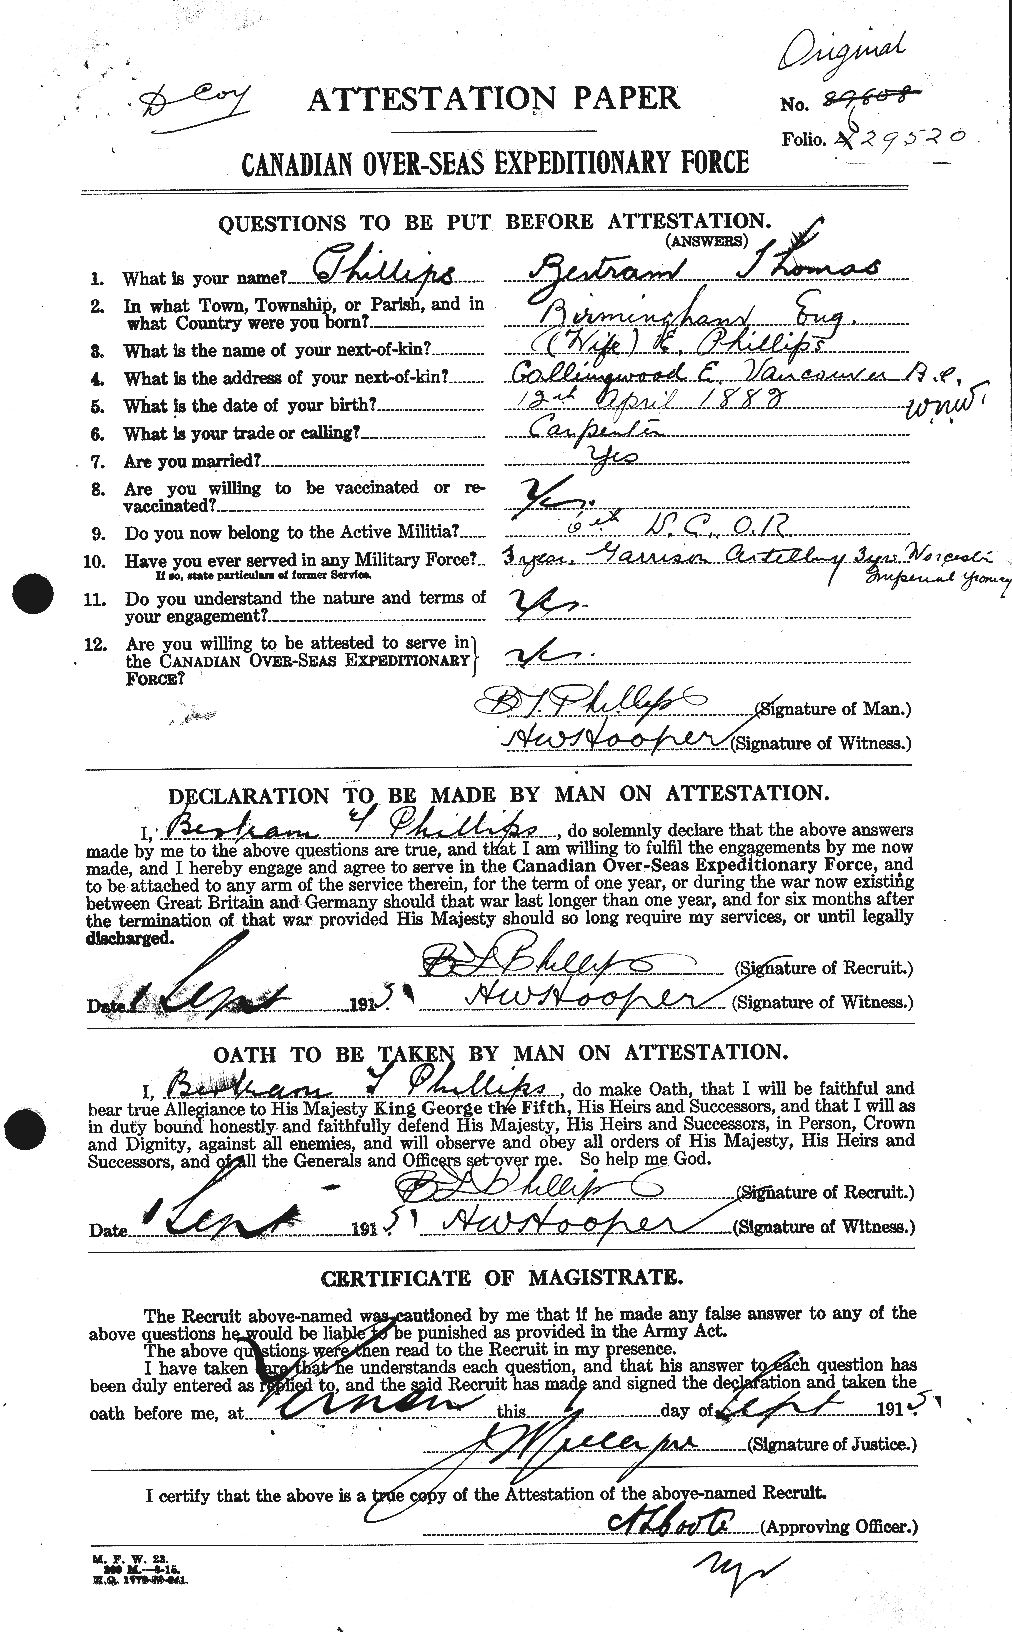 Personnel Records of the First World War - CEF 577311a